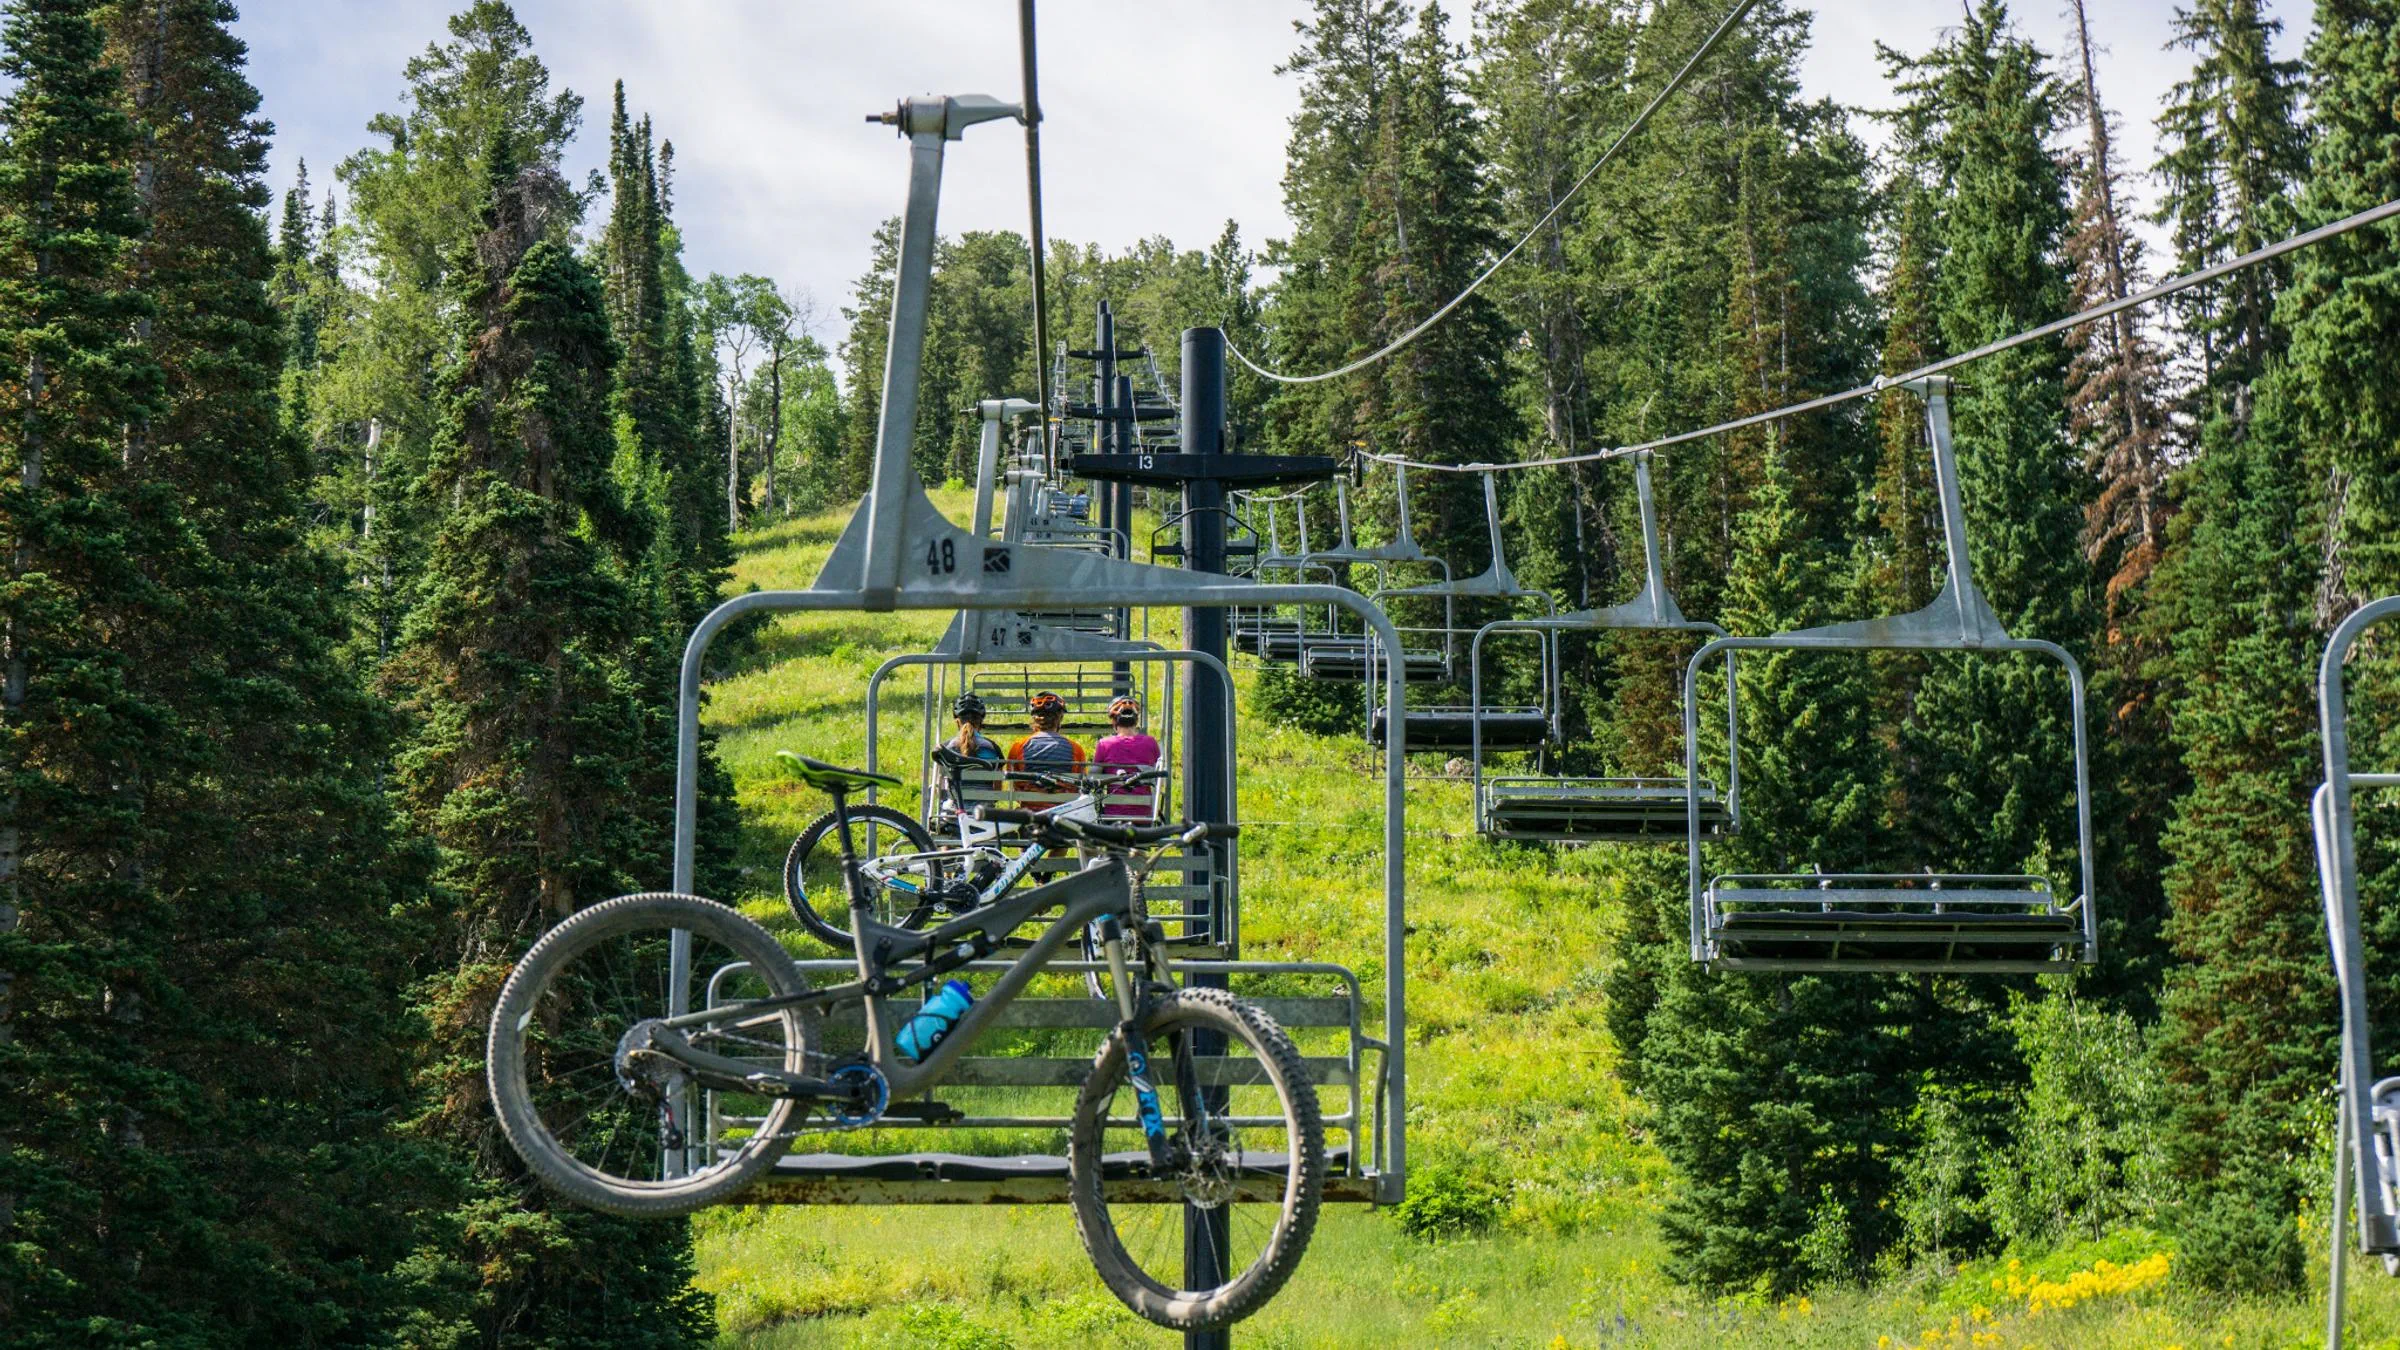 A mountain bike mounted to the chairlift for lit-served service